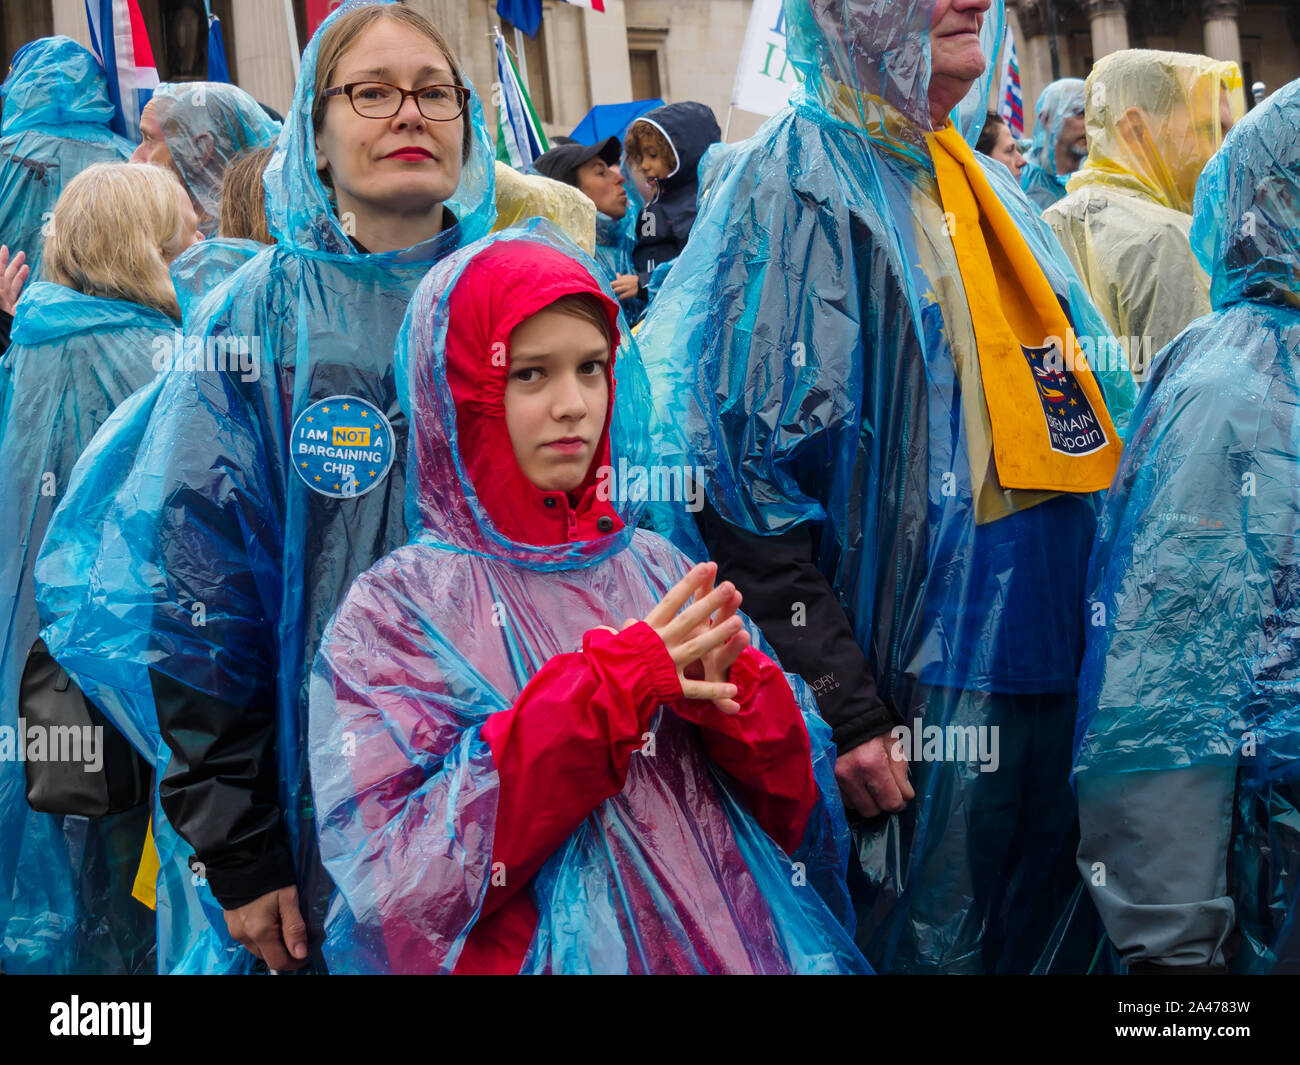 London, UK. 12th October 2019. Some of the 3 million EU citizens residents in the UK at an event organised by the3million organisation to express their love for the UK and to remind the Prime Minister ofe his broken promise to us on 1 June 2016. They wore ponchos in the blue and yellow of the European flag. The government settlement scheme is full of flaws and many who have applied have not been granted settled status, and government minister Brandon Lewis has stated that those who have failed to achieve it risk deportation. They held up copies of Vote Leave's broken promise and tore it up. Pe Stock Photo